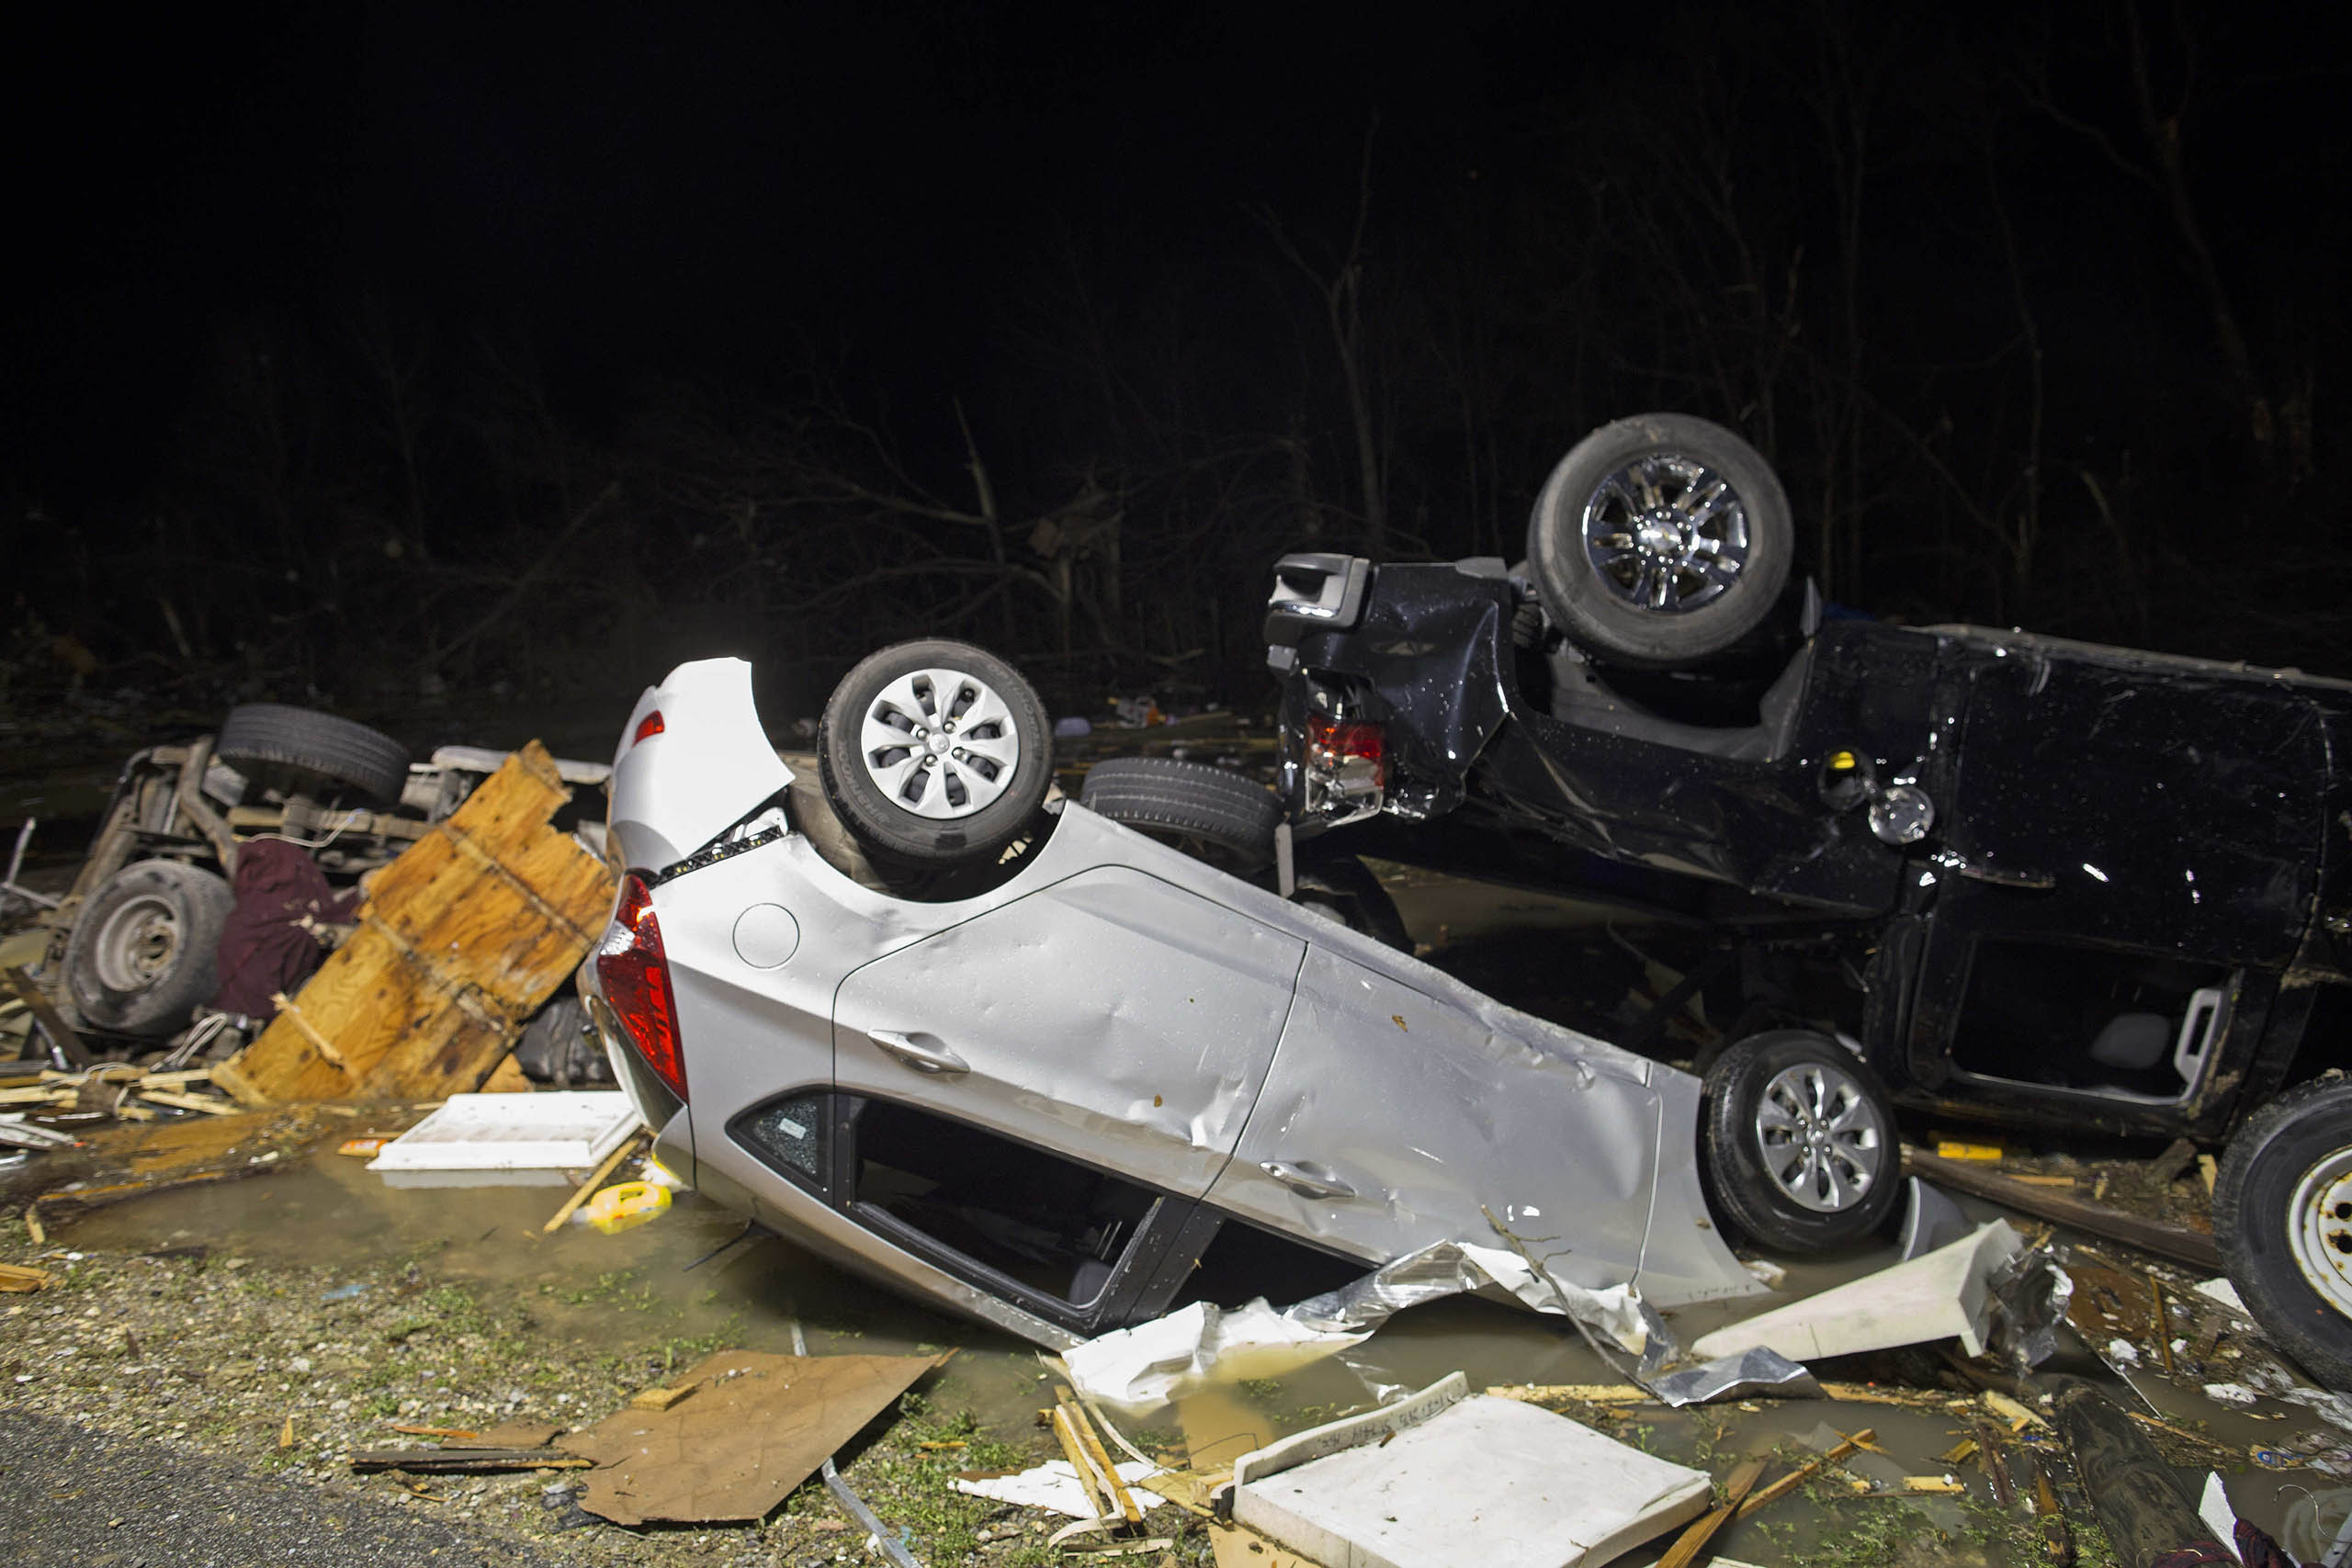 Destroyed trailers and vehicles are all that remain of the Sugar Hill RV Park after a suspected tornado hit in Convent, La., Feb. 23, 2016. (Max Becherer—AP)